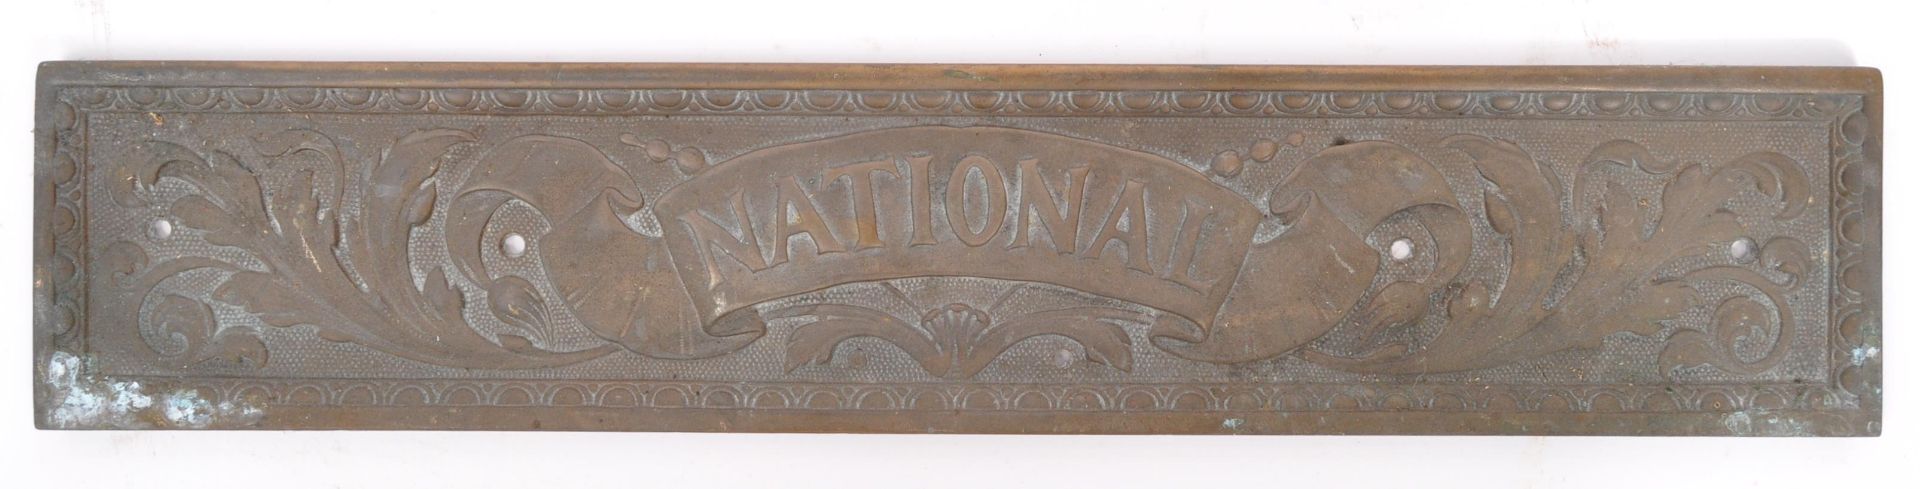 19TH CENTURY METAL PAD FOOT PLANTER & WALL PLAQUE - Image 5 of 6